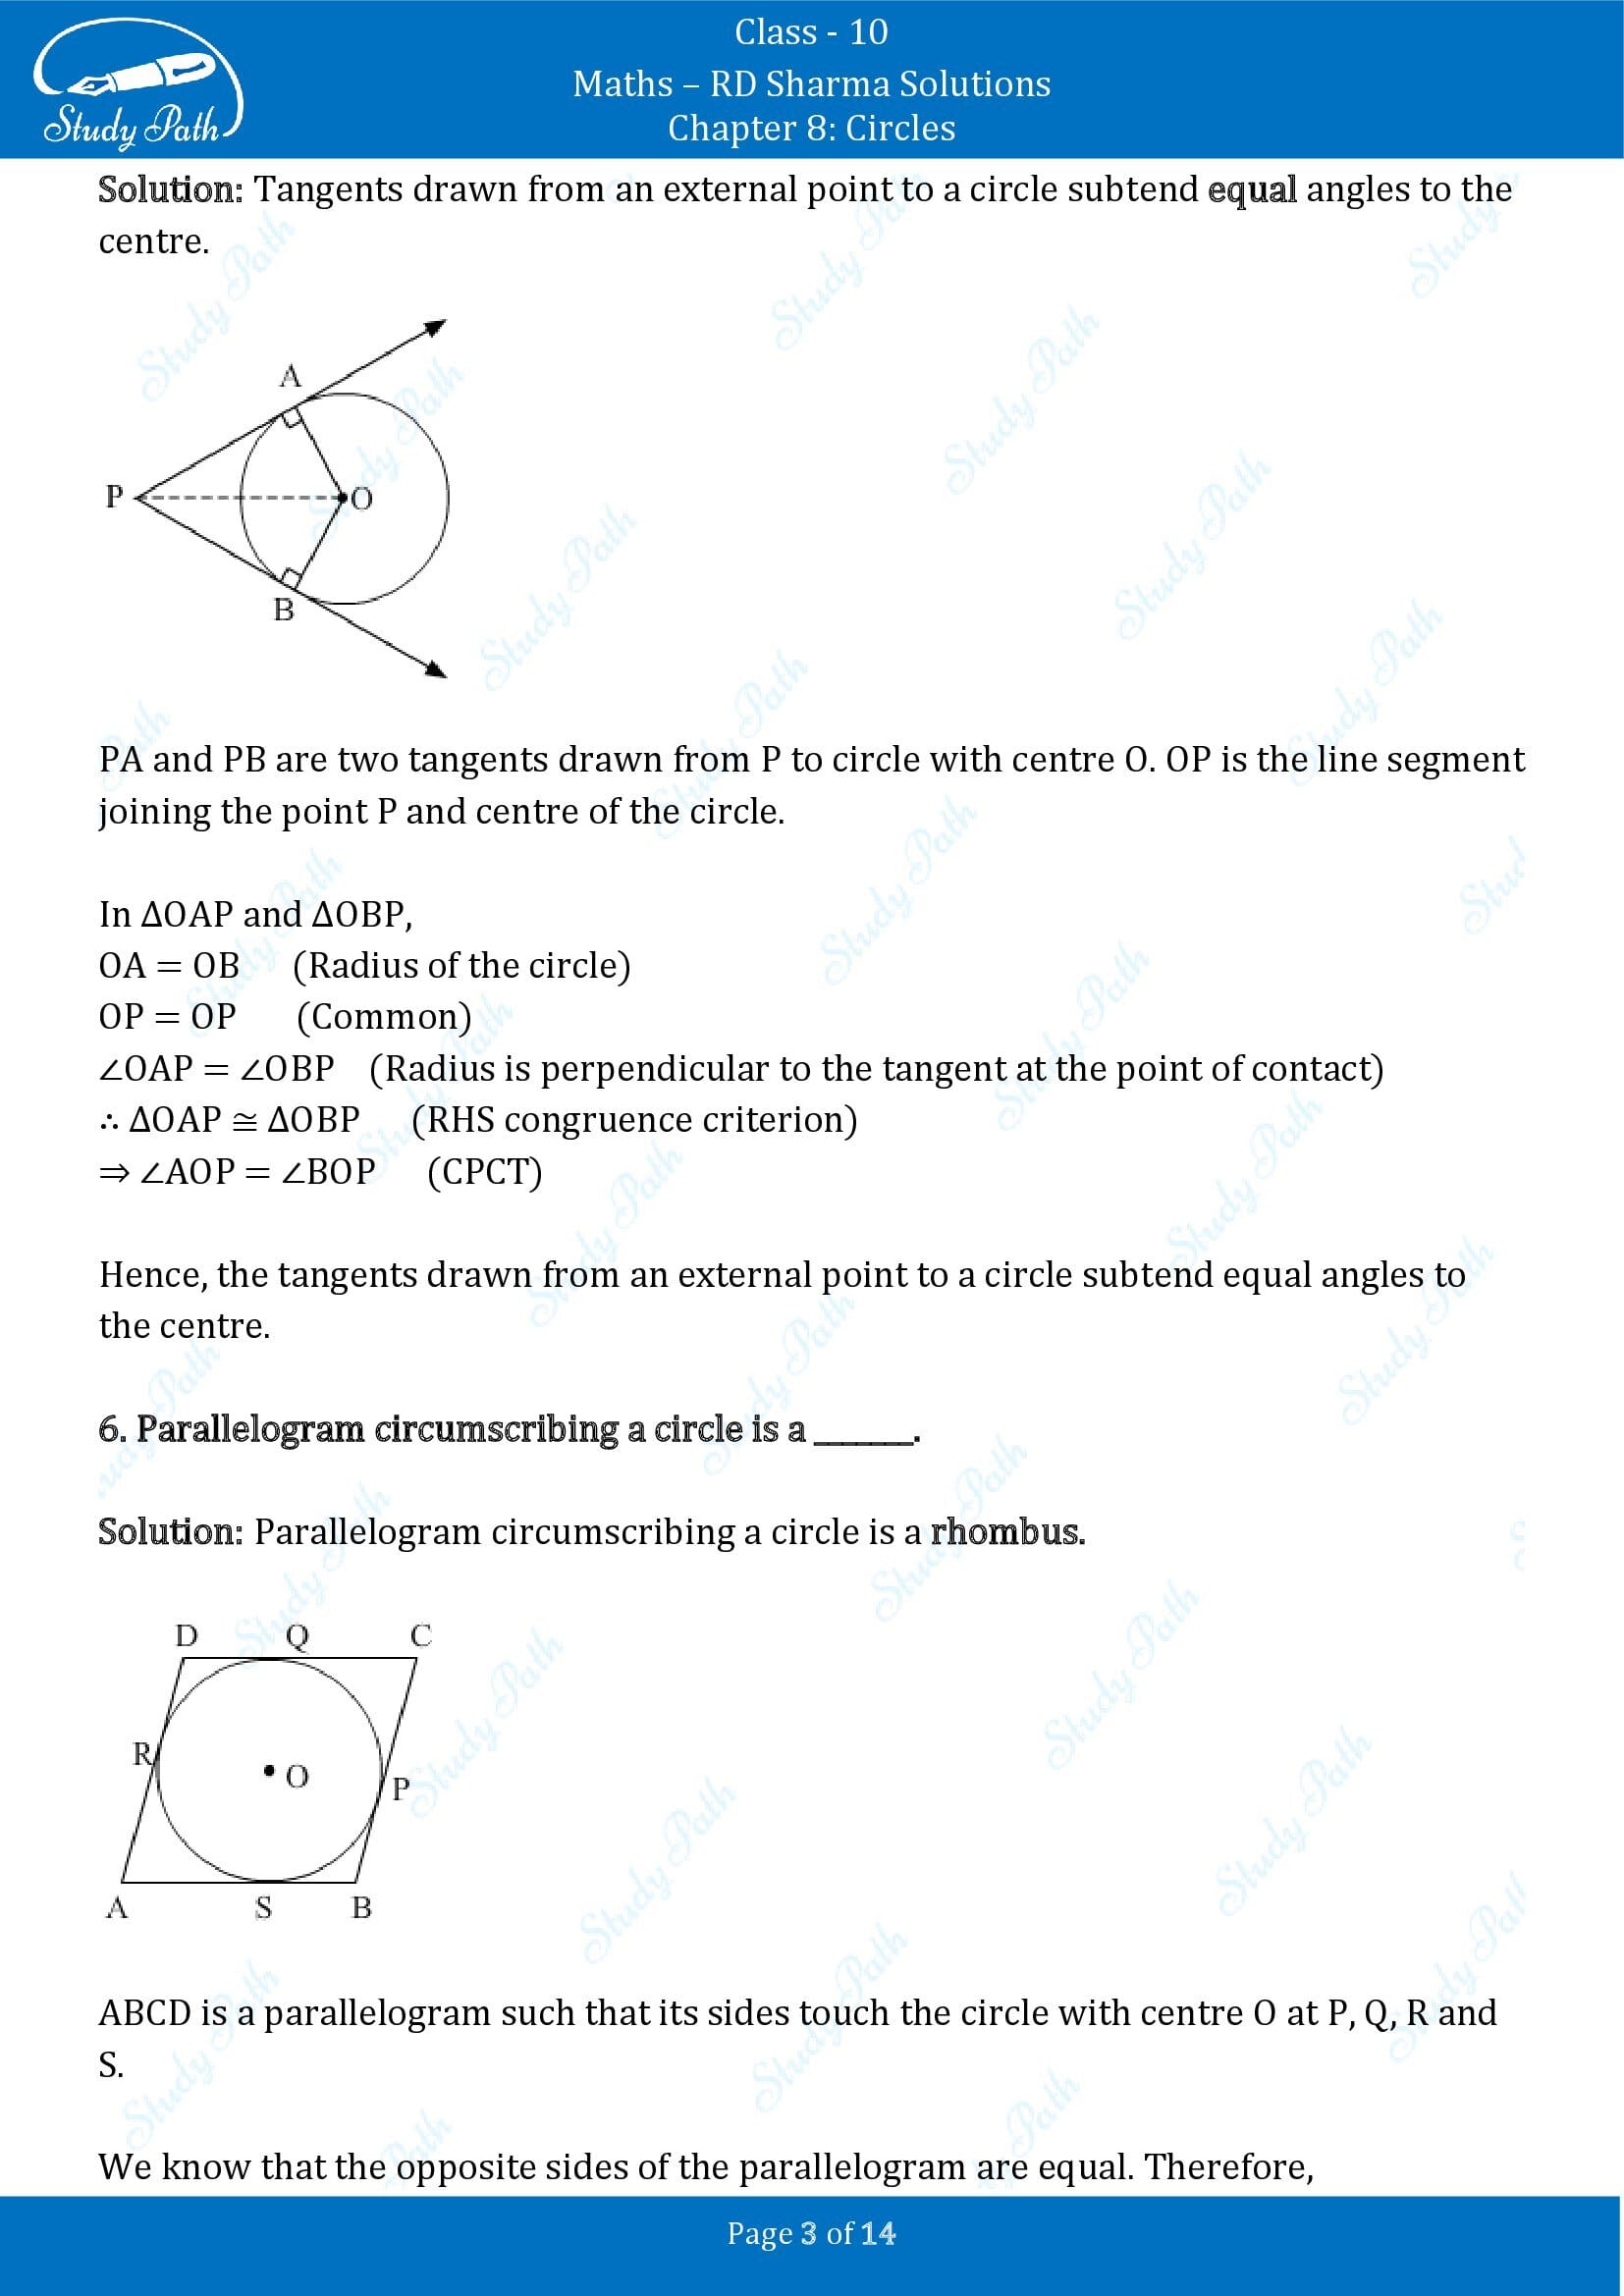 RD Sharma Solutions Class 10 Chapter 8 Circles Fill in the Blank Type Questions FBQs 00003